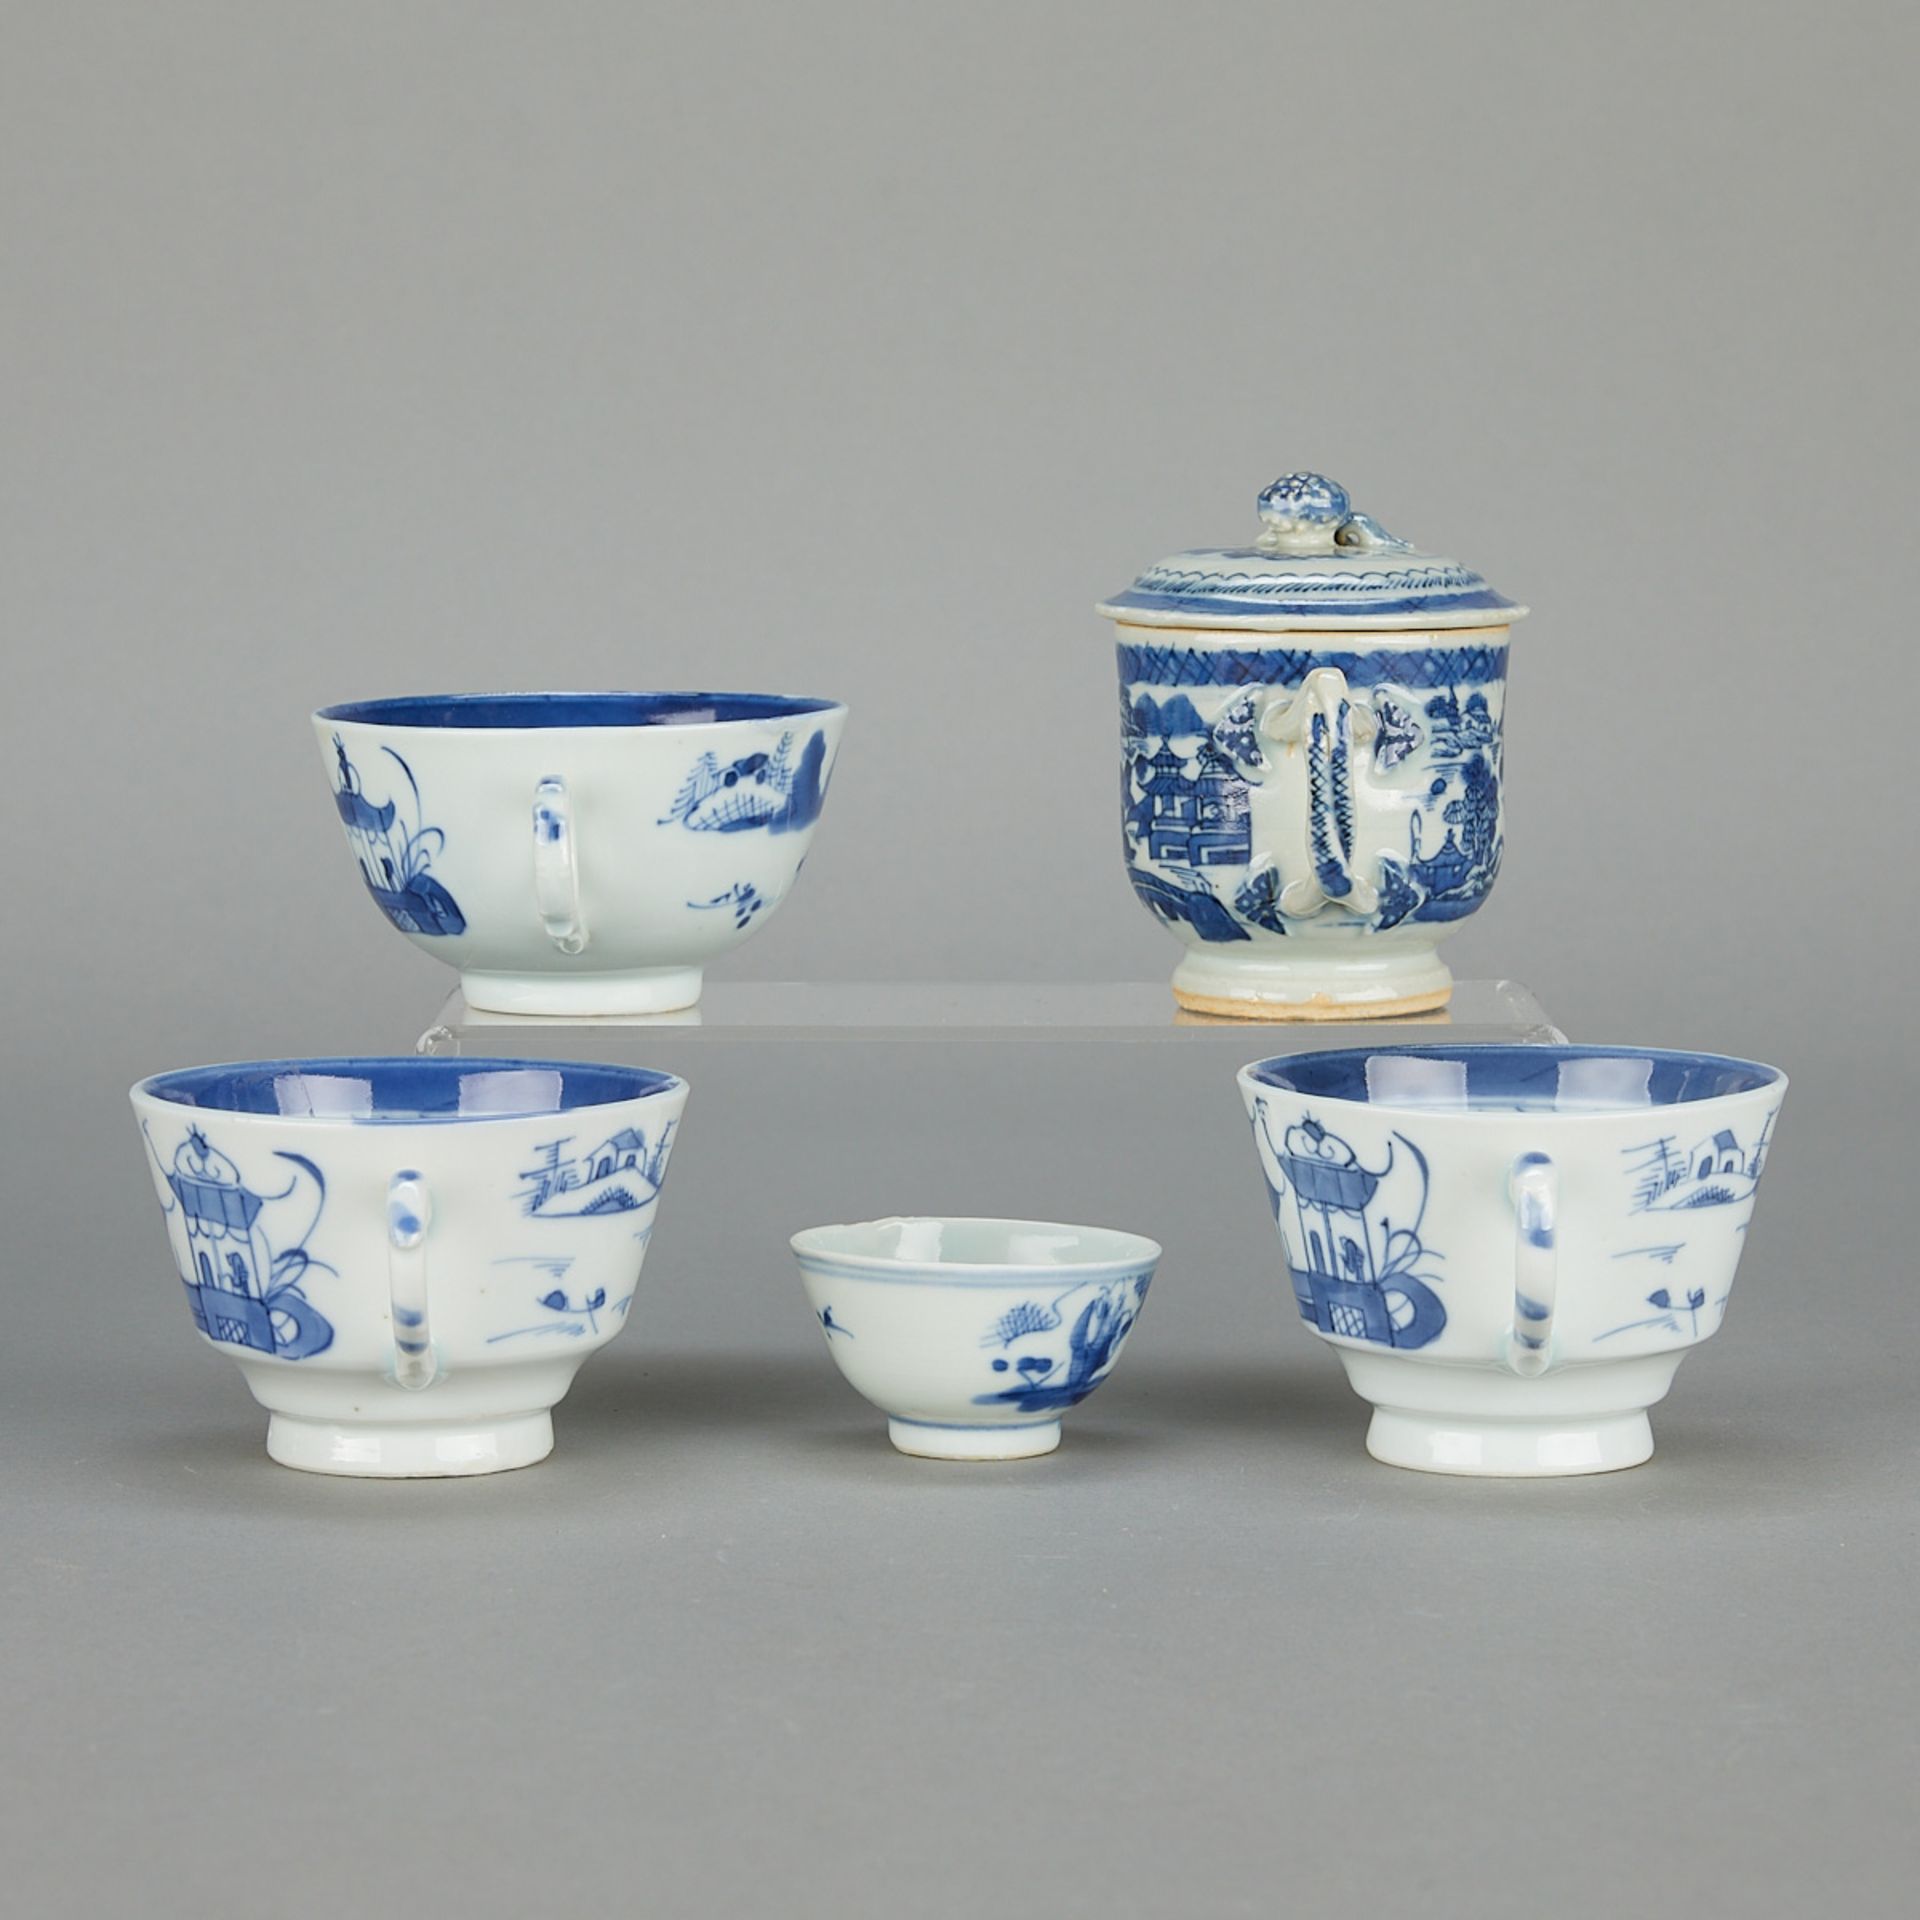 14 Pcs 19th c. Chinese Canton Porcelain - Image 6 of 25